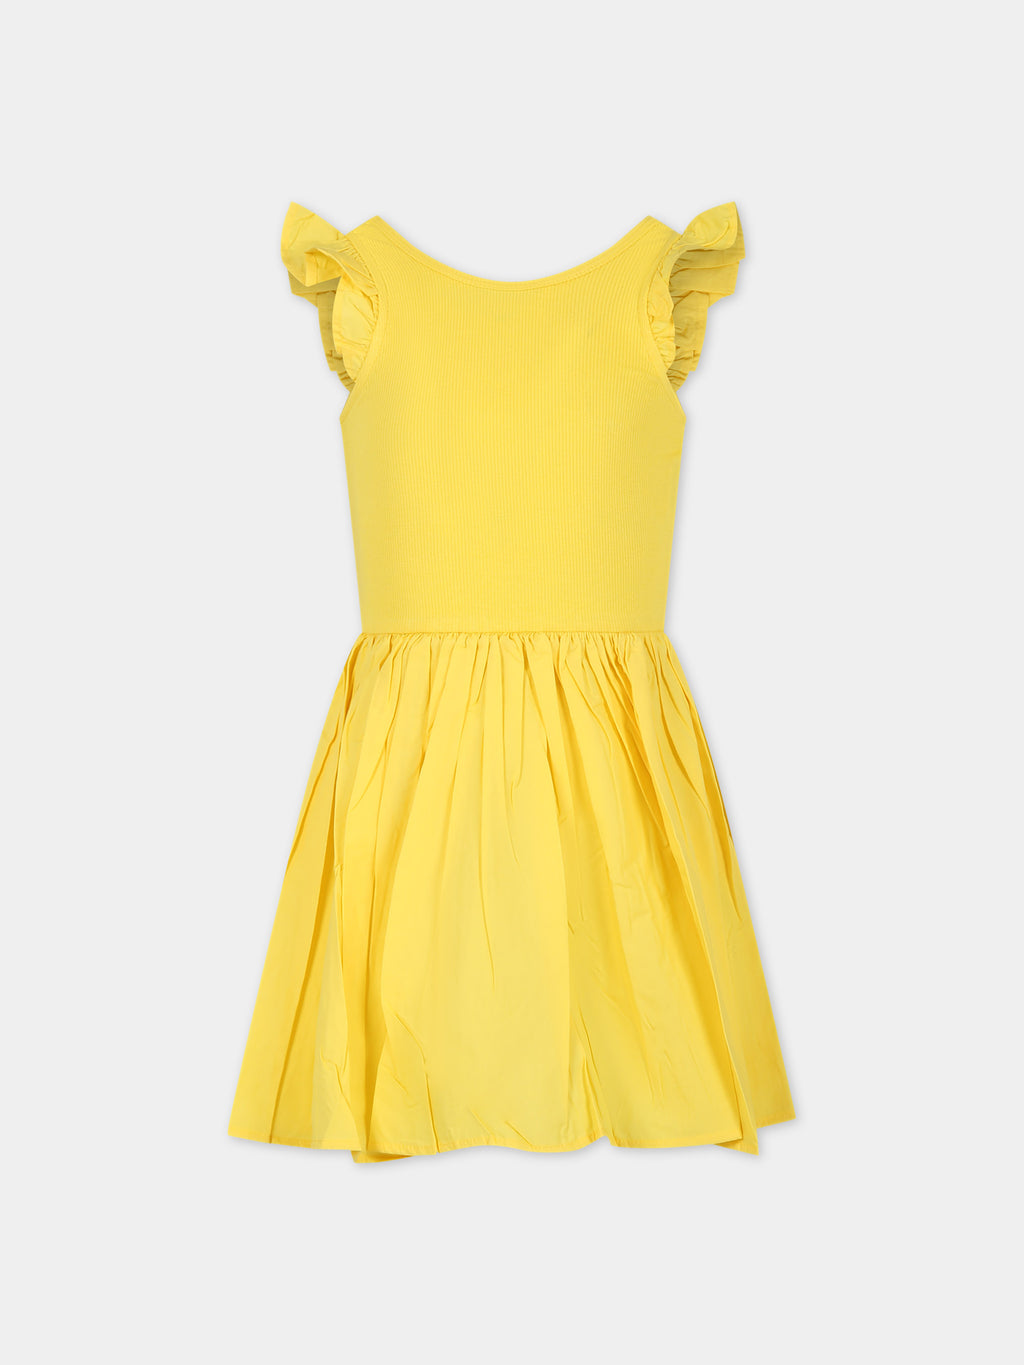 Yellow dress for girl